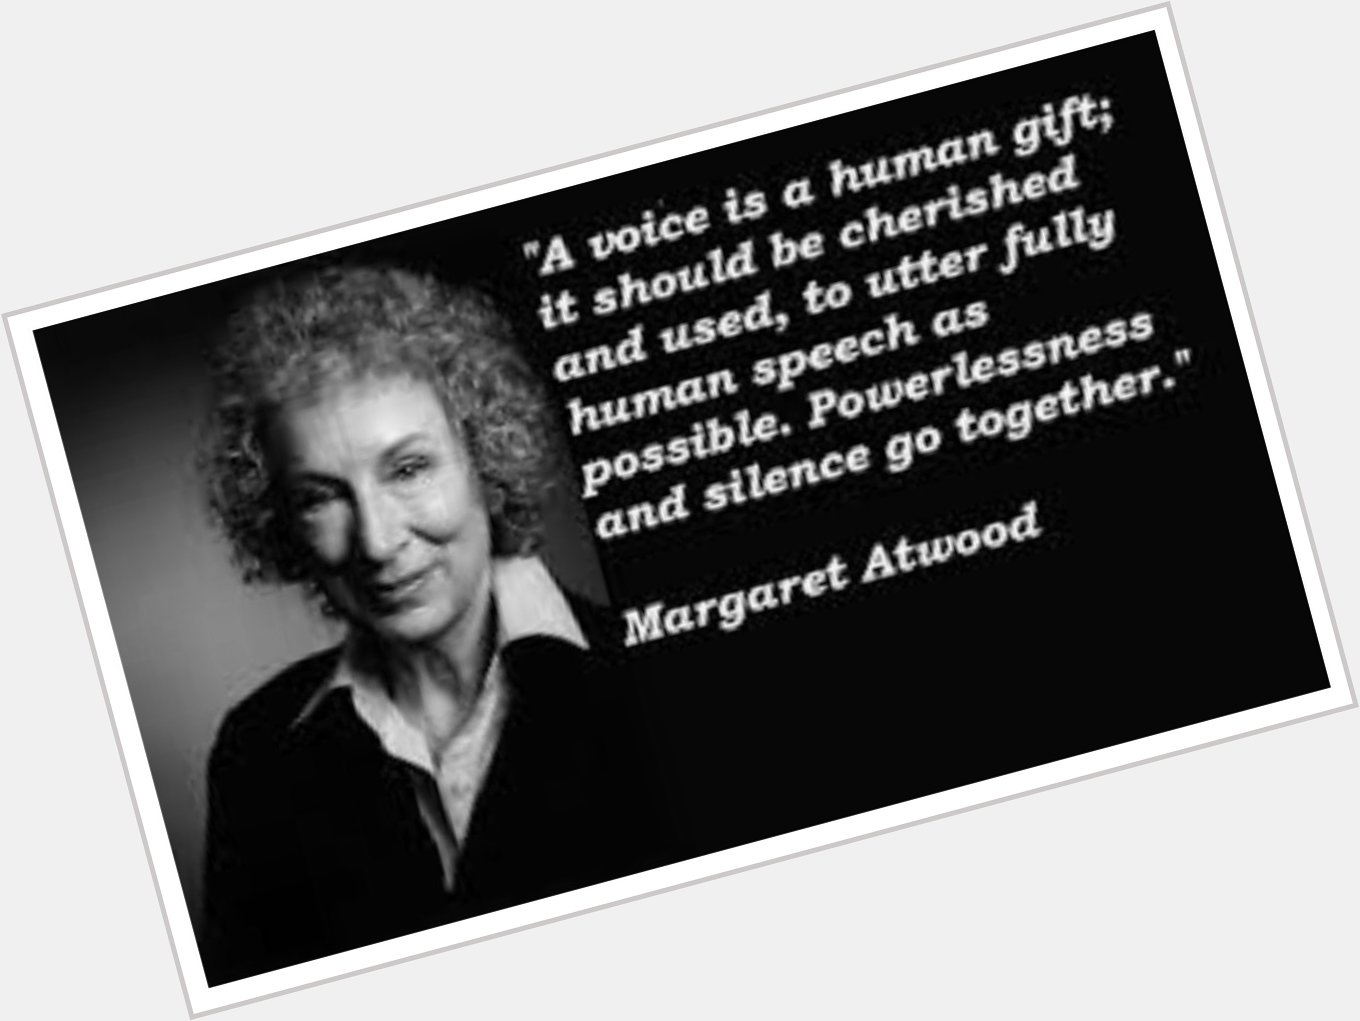 Today the Canadian writer Margaret Atwood turns 80. Happy birthday, Ms. Atwood!   